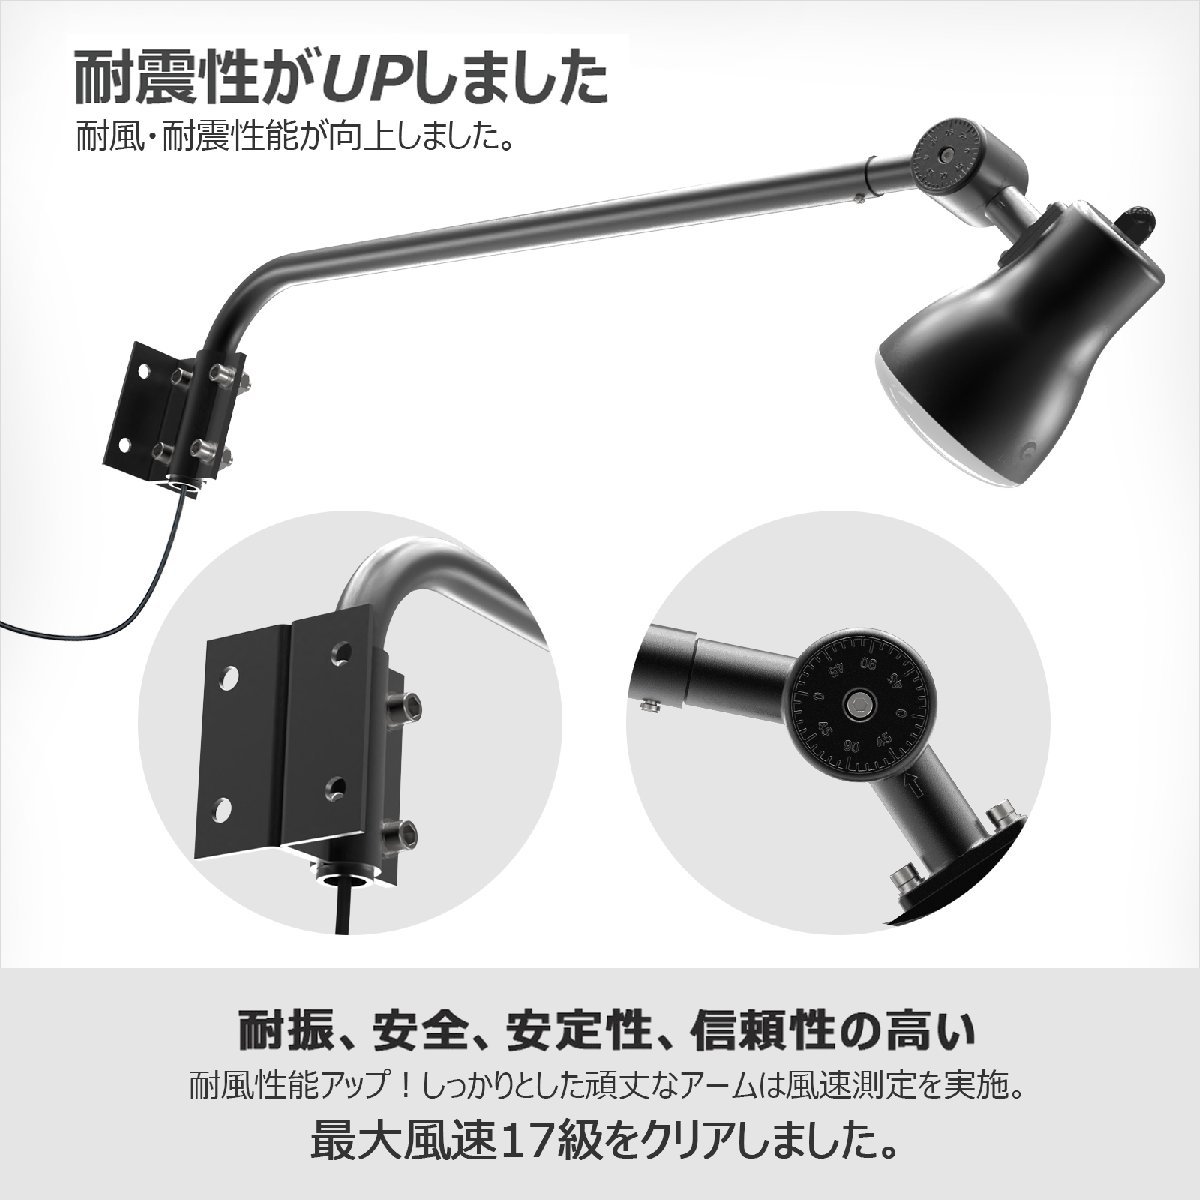 GOODGOODS LED arm light lamp color * daytime white color switch type 45W 4500LM wide-angle 120 times signboard outdoors waterproof advertisement floodlight white LD-K9L